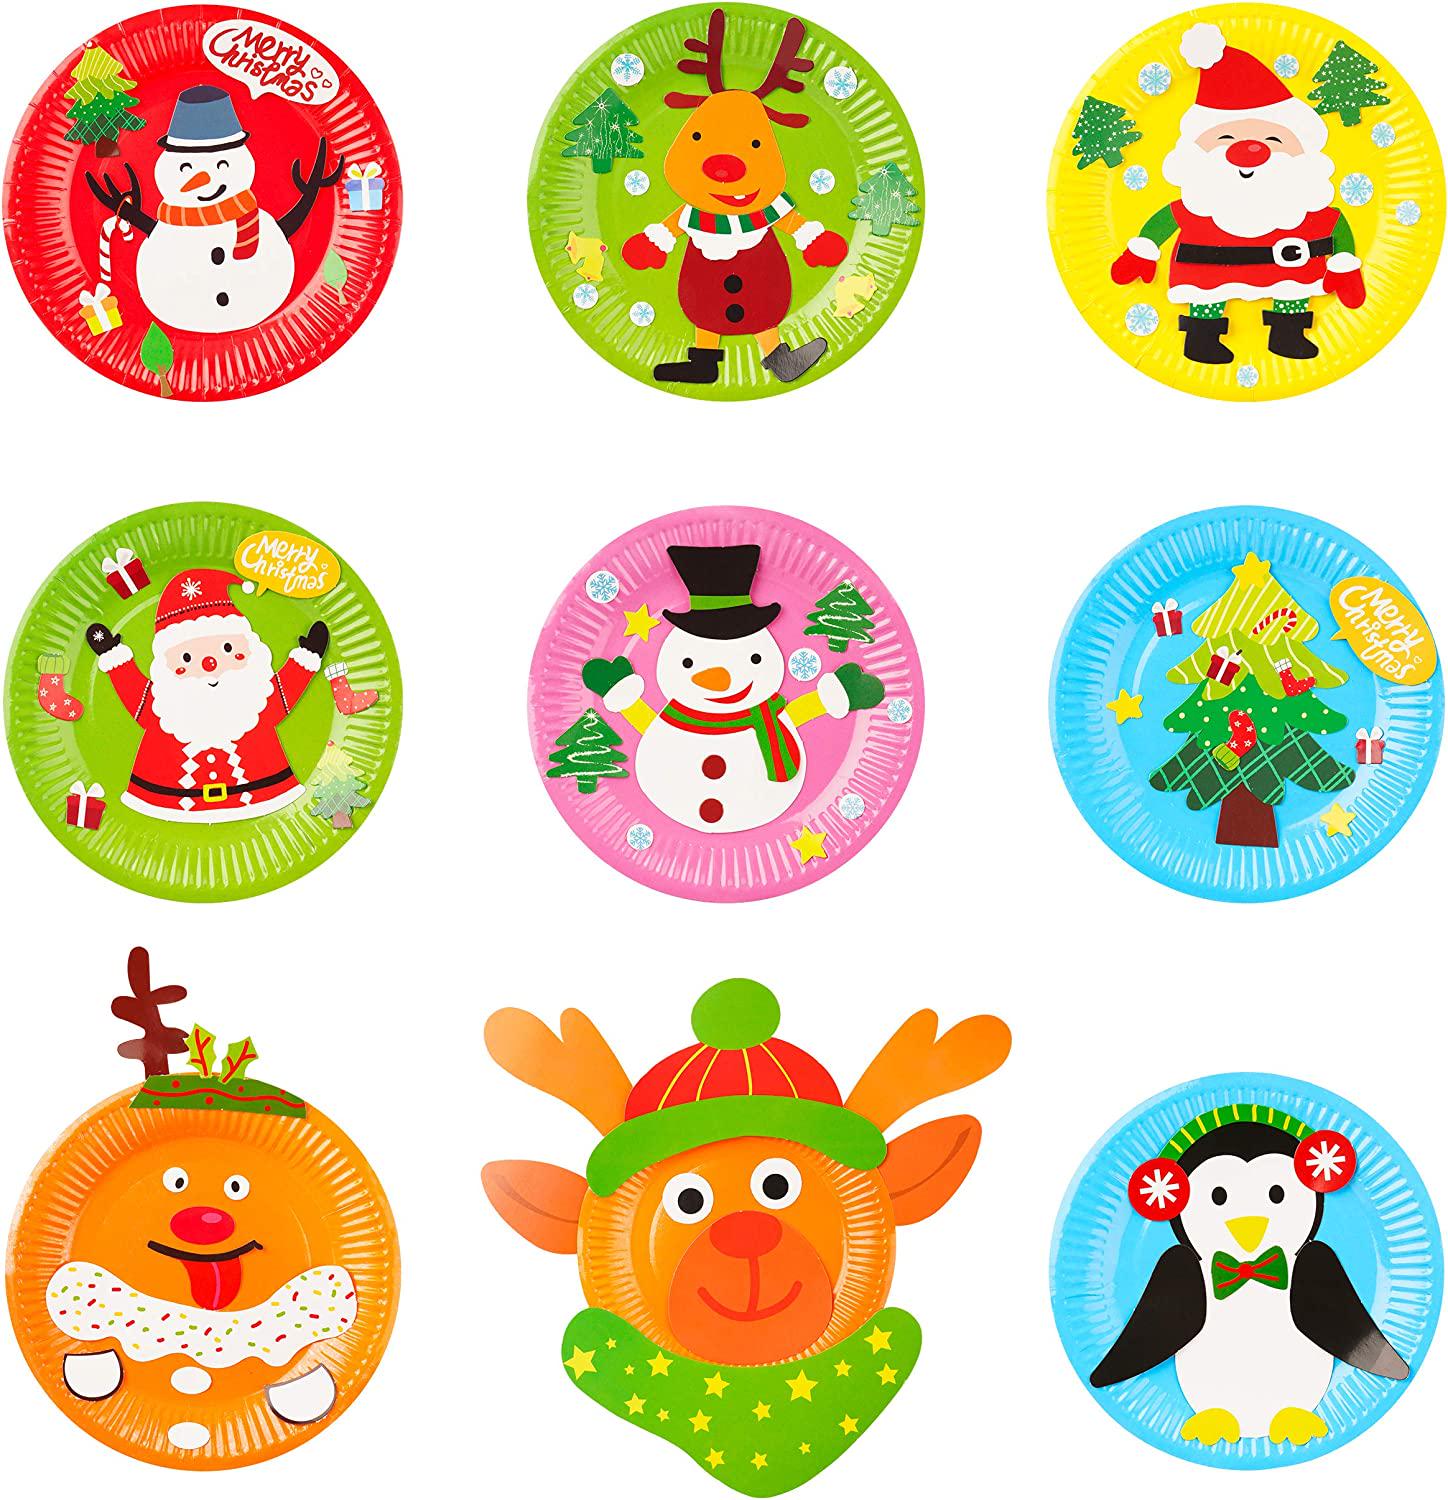 MALLMALL6, MALLMALL6 9Pcs Christmas Paper Plate Art Kits for Kids Theme Educational DIY Craft Card Parent-Child Activity Early Learning Art Project Classroom Party Supplies for Preschool Toddler Boys Girls